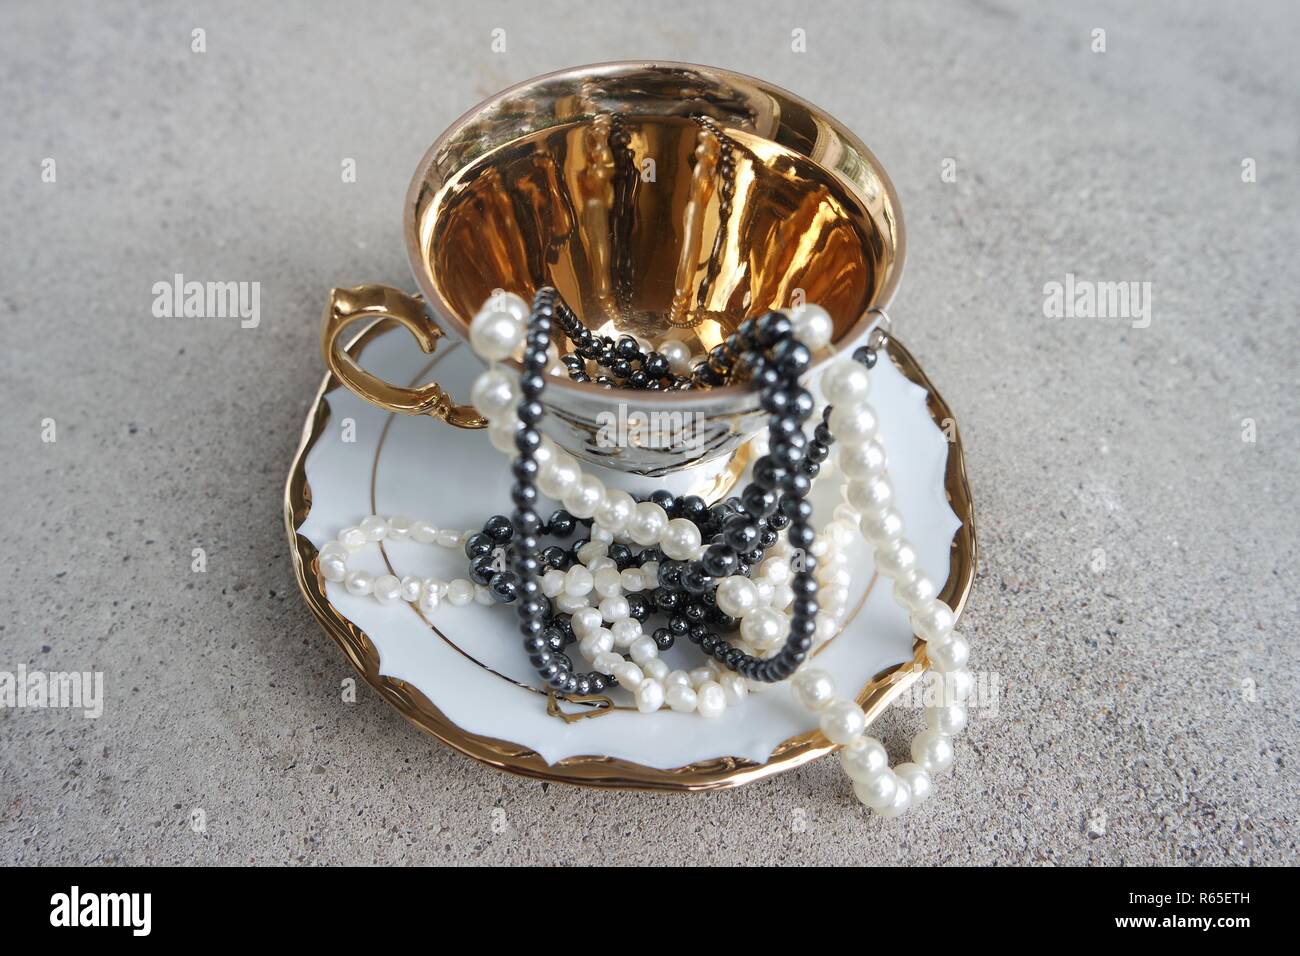 pearls in golden cup Stock Photo